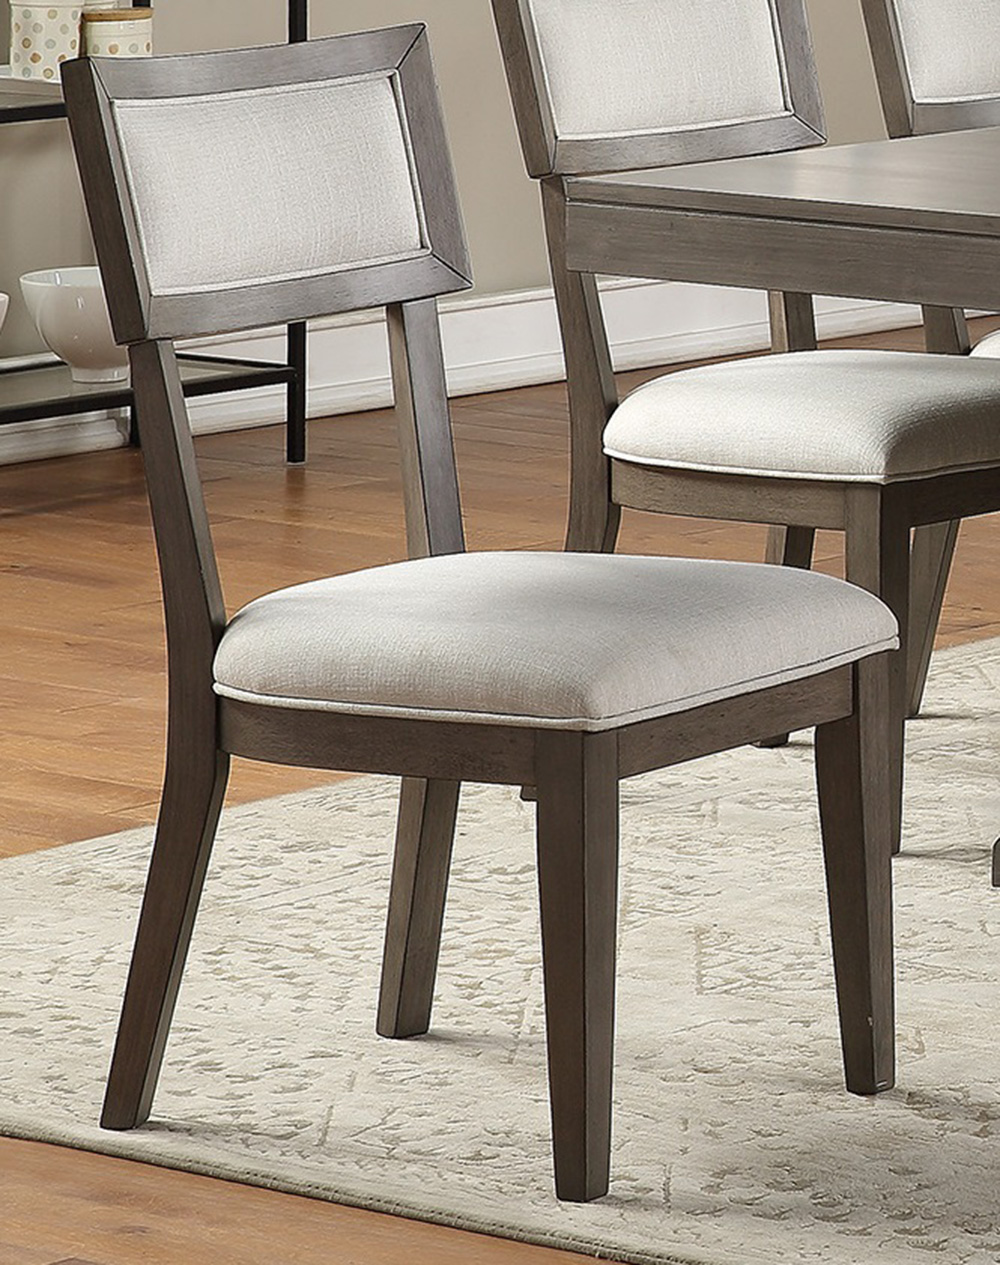 Upholstered Dining Chair Set of 2, with Backrest, and Wood Legs, for Restaurant, Cafe, Tavern, Office, Living Room - Gray